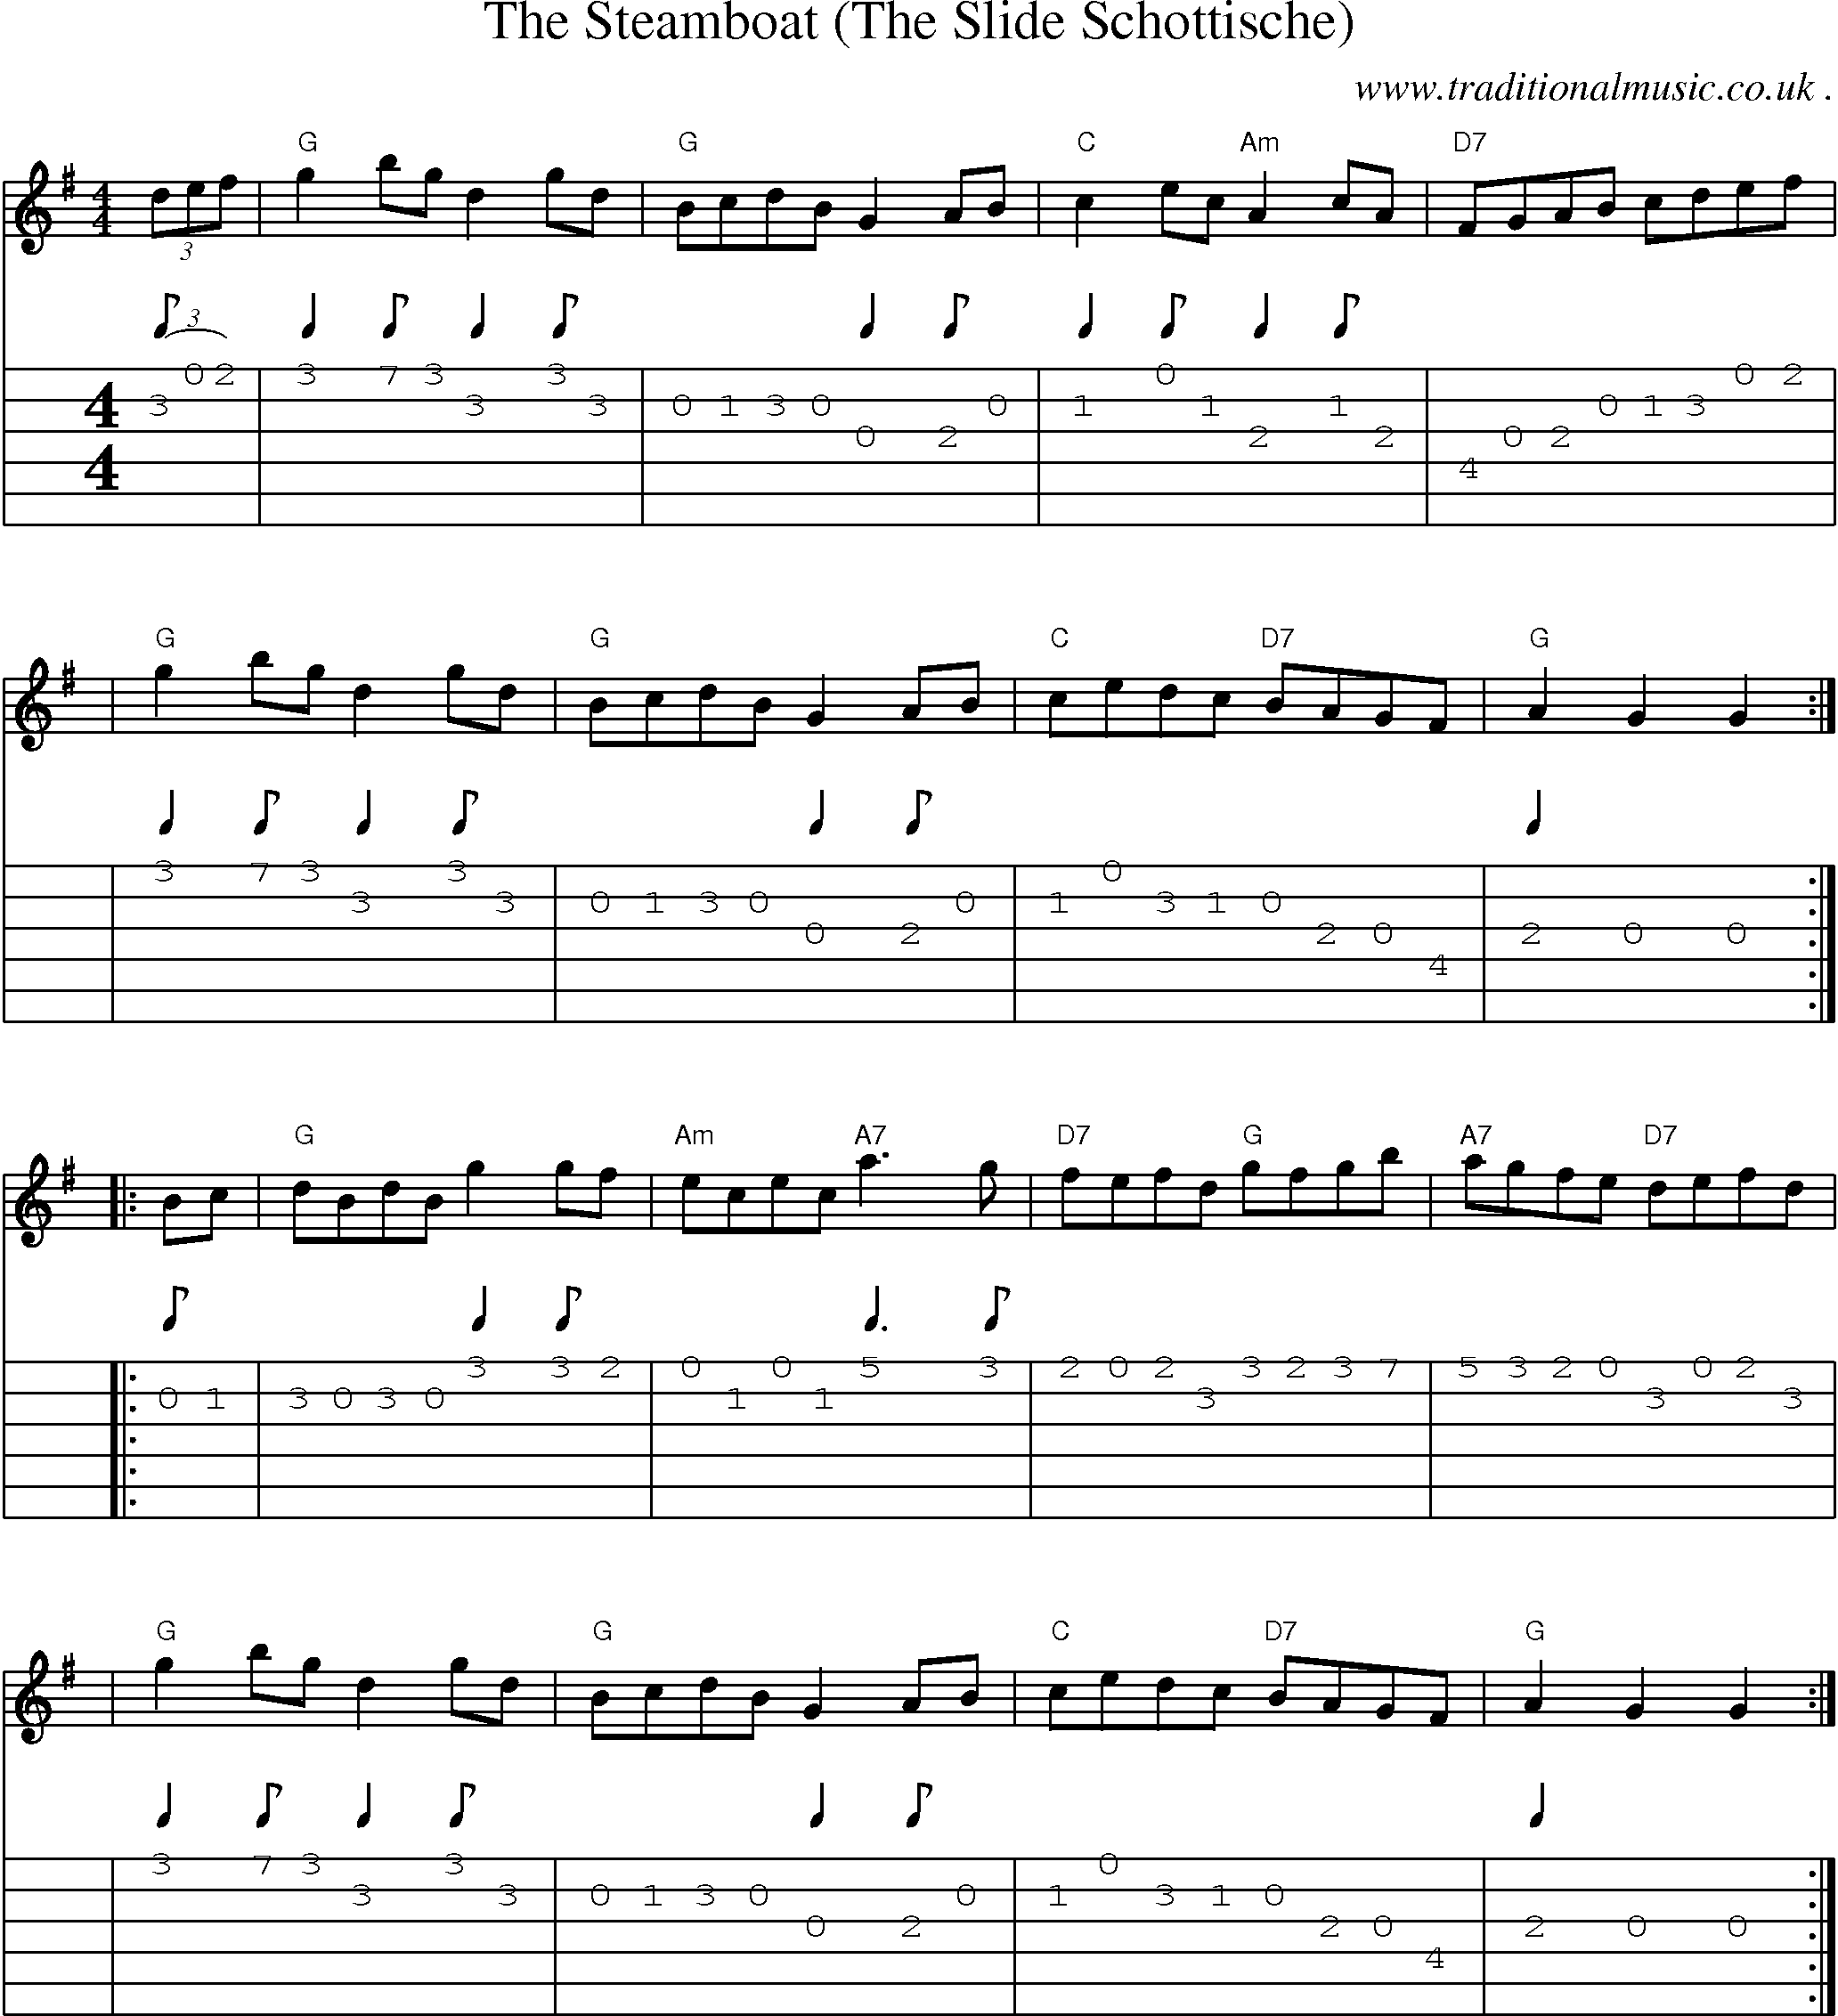 Sheet-music  score, Chords and Guitar Tabs for The Steamboat The Slide Schottische